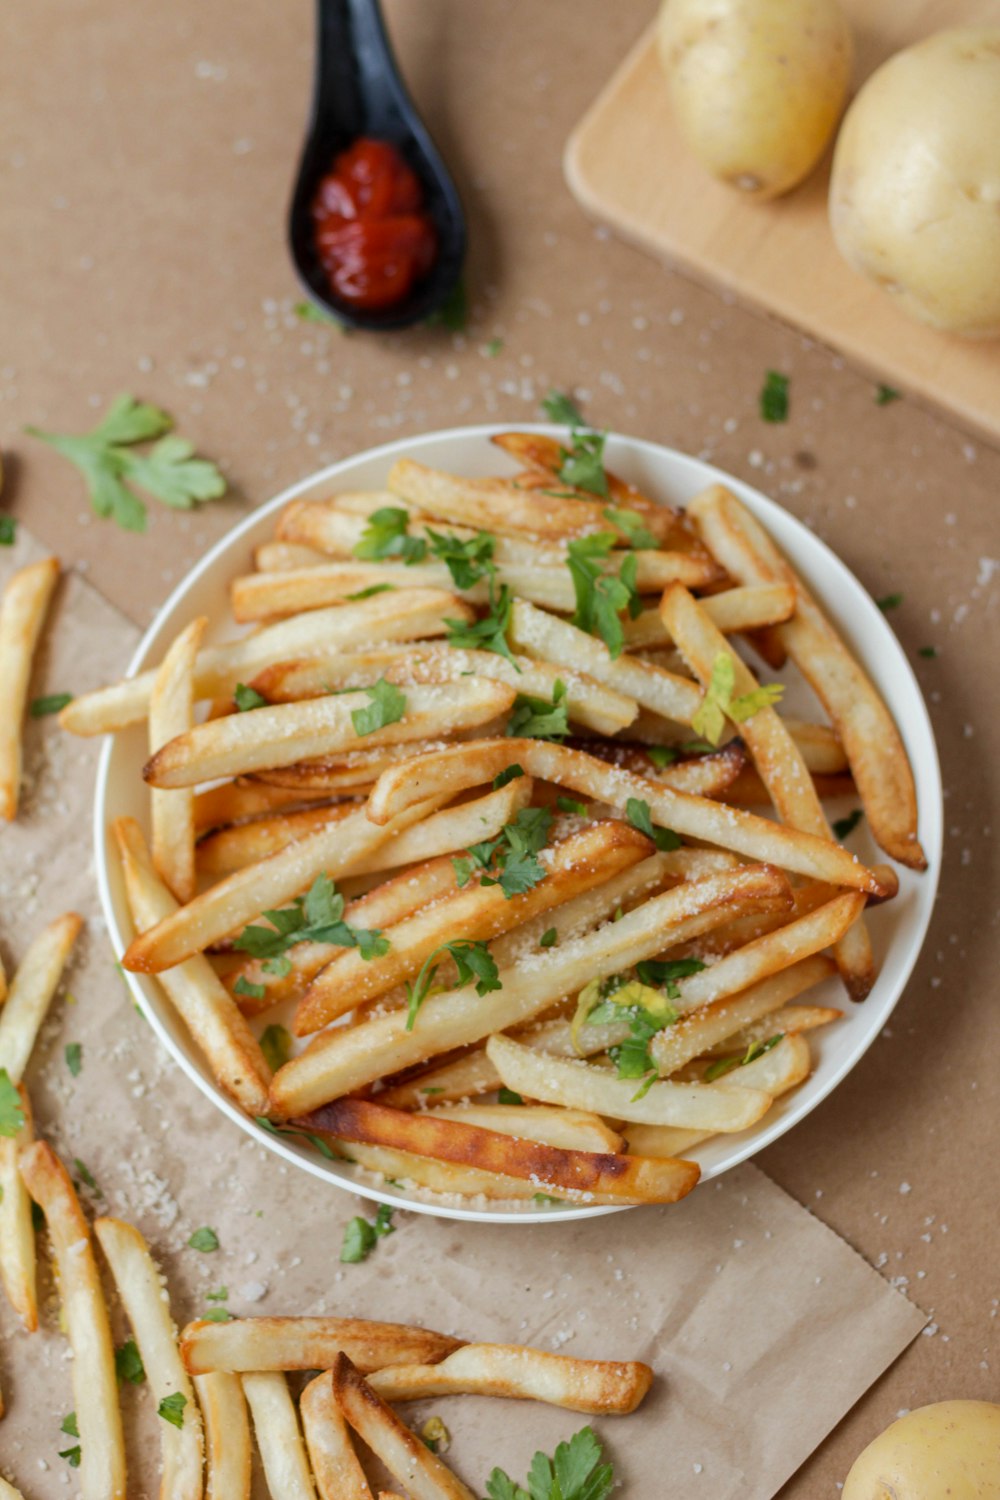 french fries on white ceramic plate